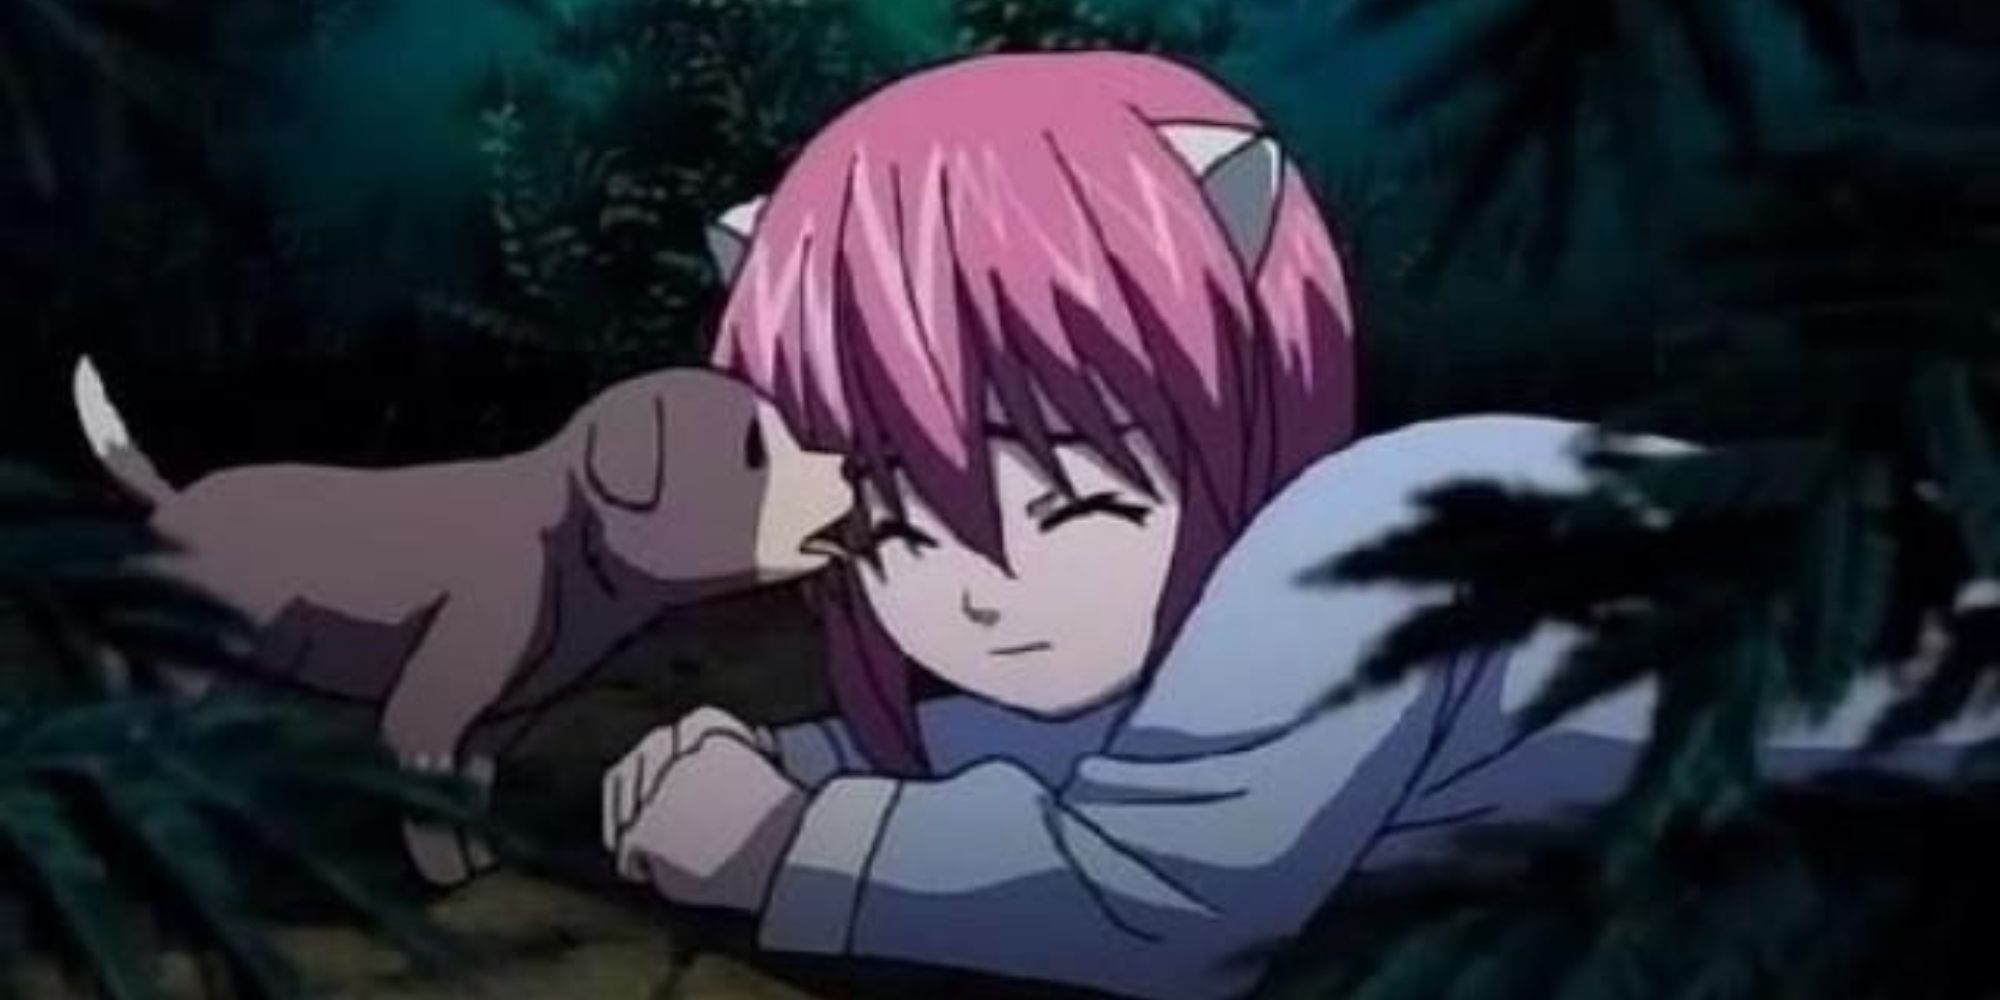 puppy and Lucy in Elfen Lied